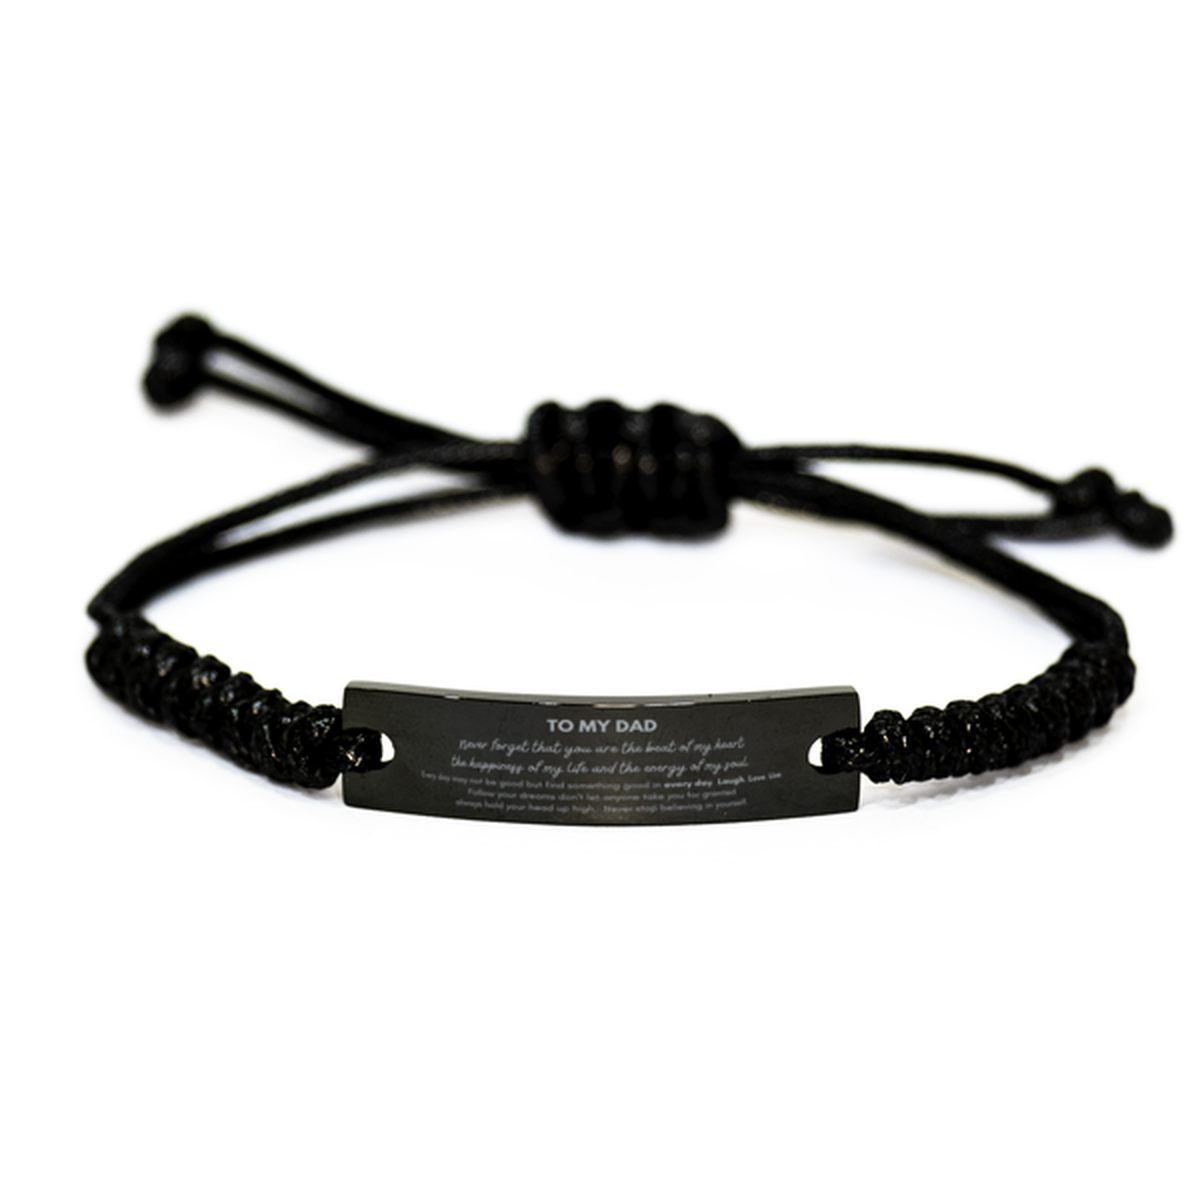 To My Dad Bracelet Gifts, Christmas Dad Black Rope Bracelet Present, Birthday Unique Motivational For Dad, To My Dad Never forget that you are the beat of my heart the happiness of my life and the energy of my soul